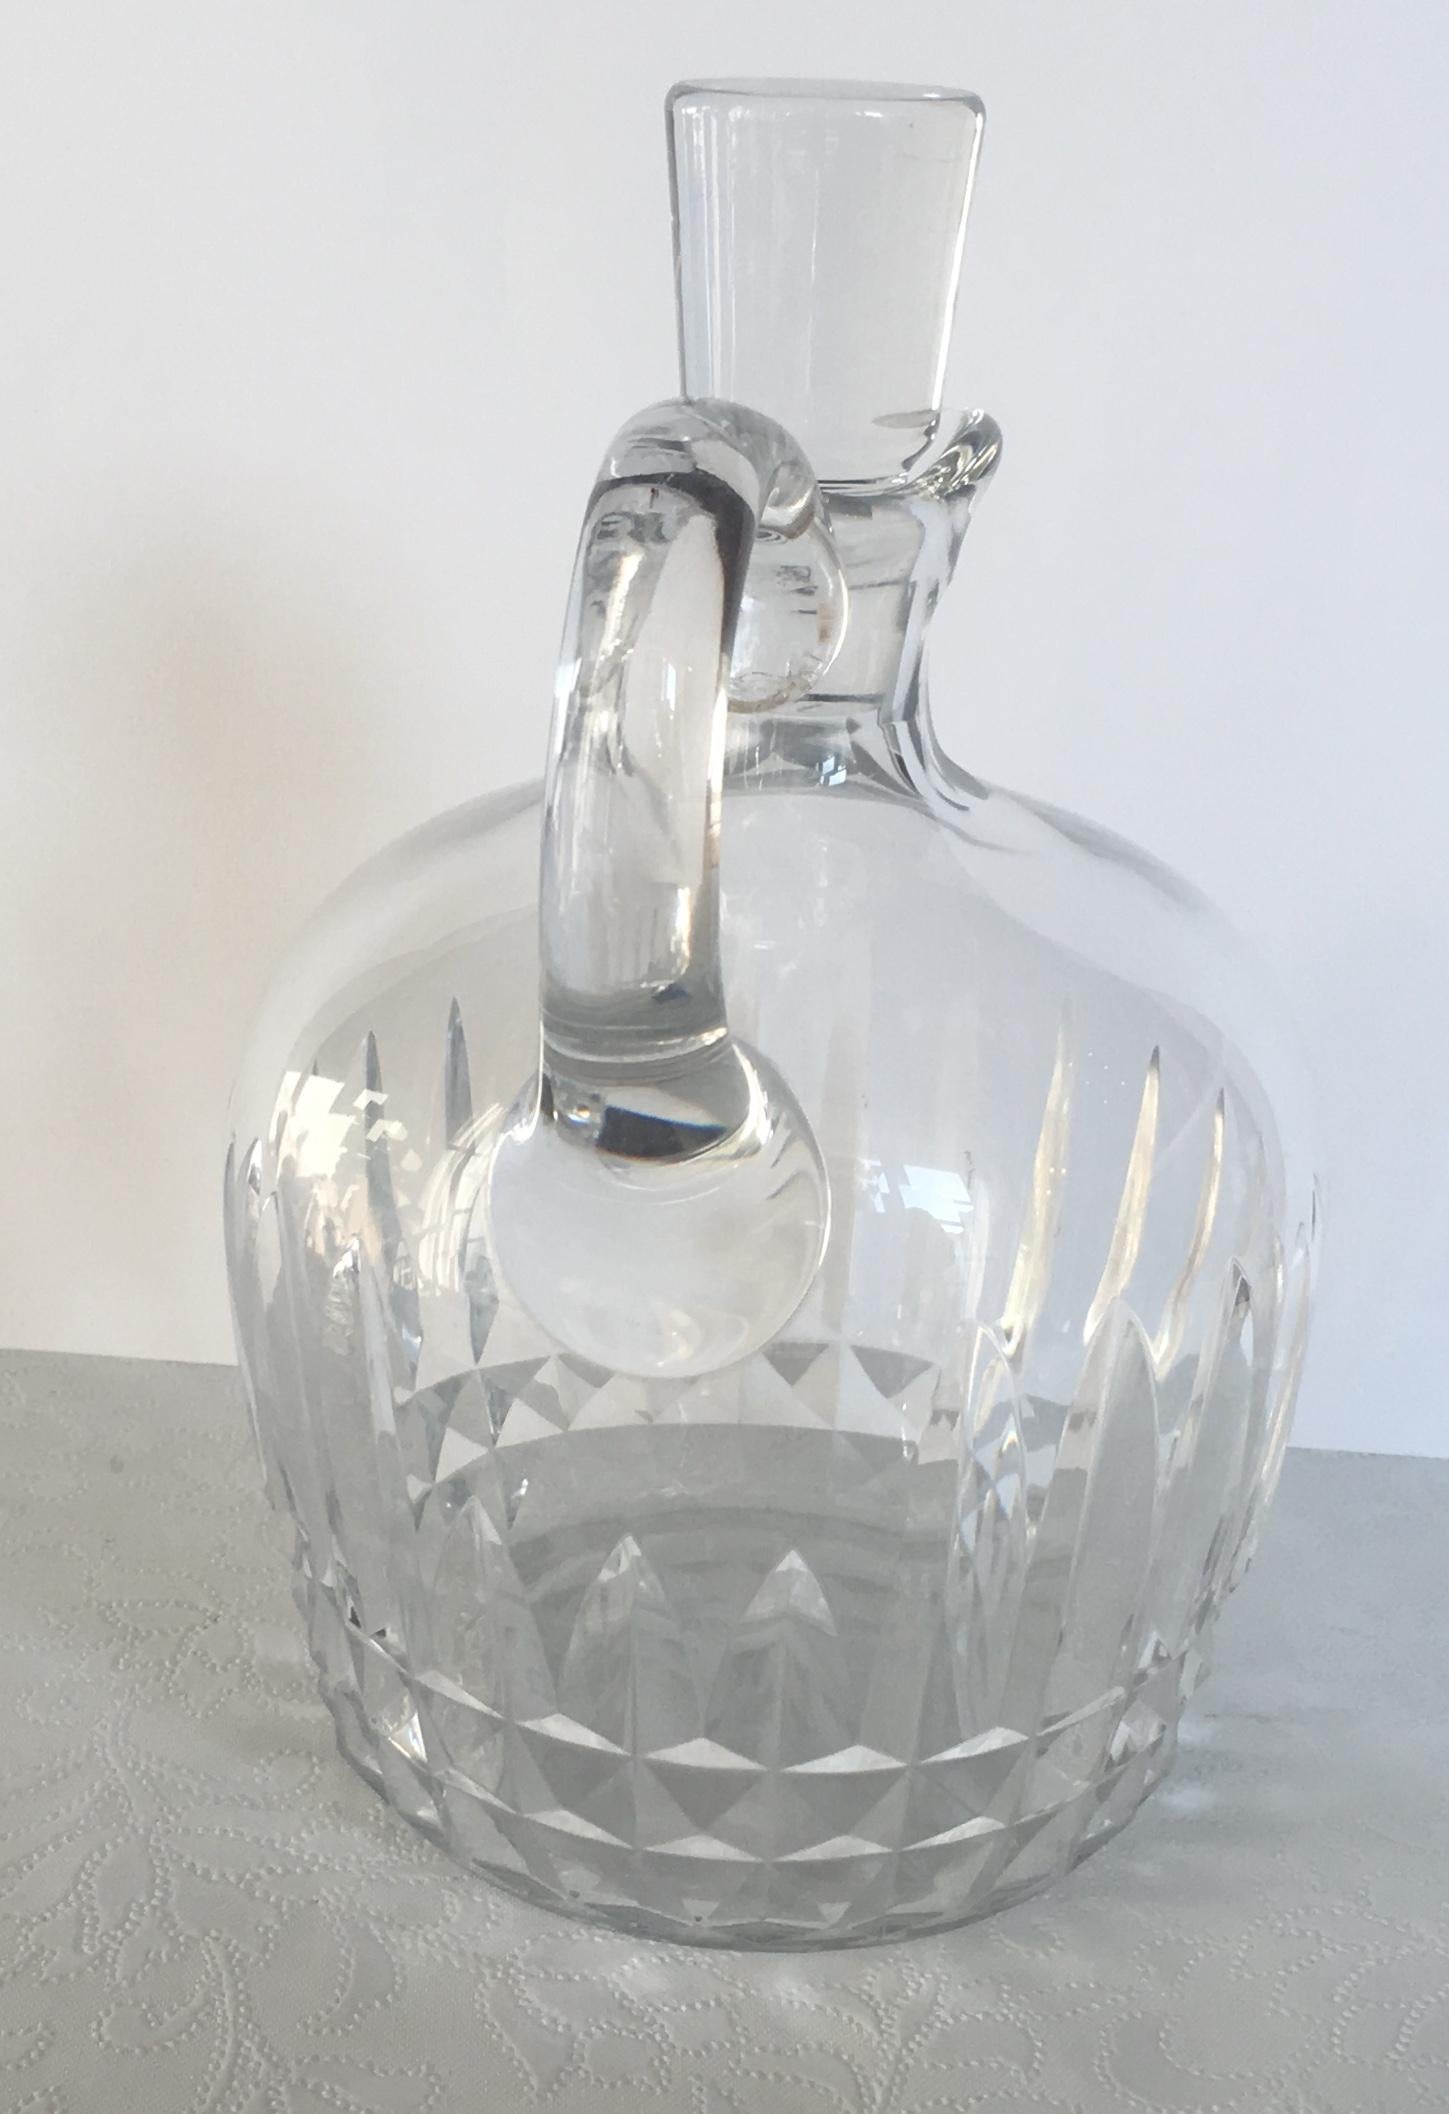 Elegant Baccarat handcut crystal decanter and original bouchon (cork) in what seems to be unused condition.
 
Excellent quality, circa 1950. 
Bears the makers mark.
A new bouchon has been sourced as the original has a minor imperfection on the outer